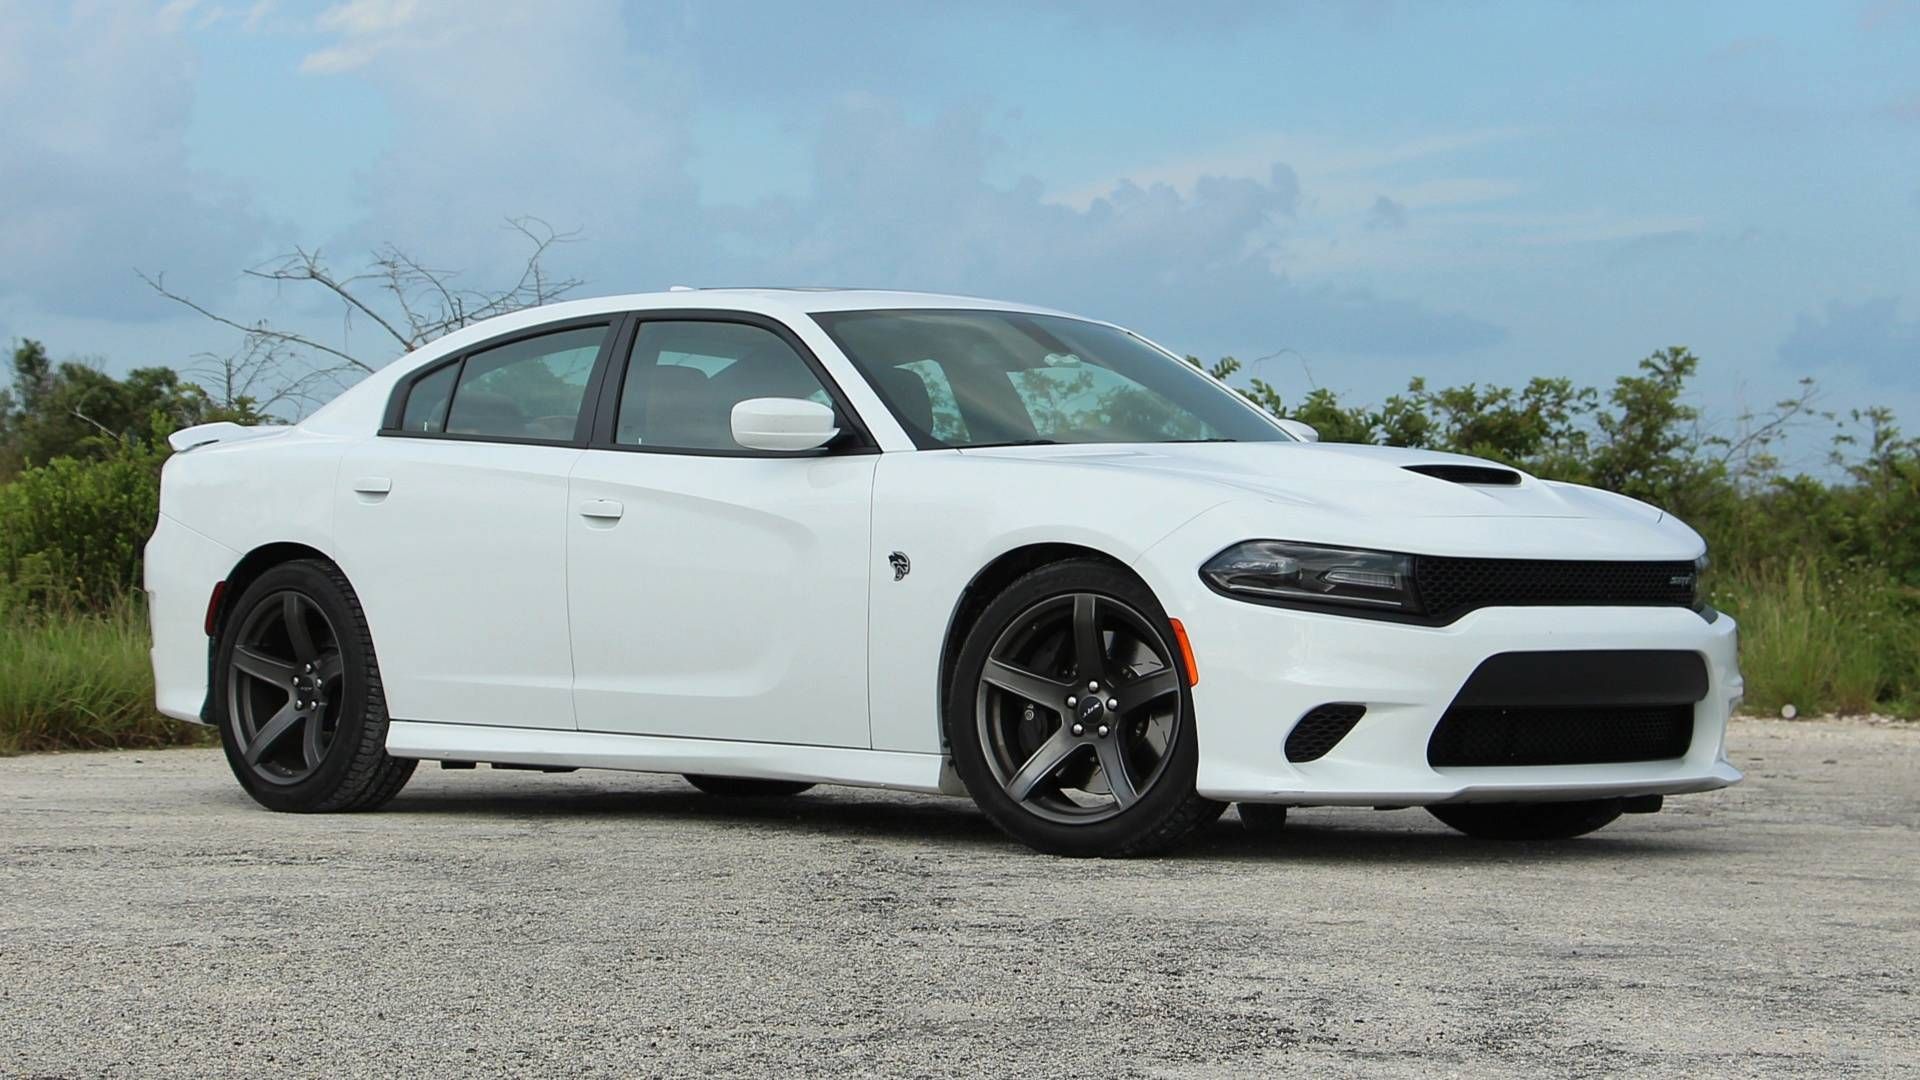 Dodge Charger Hellcat parked outside